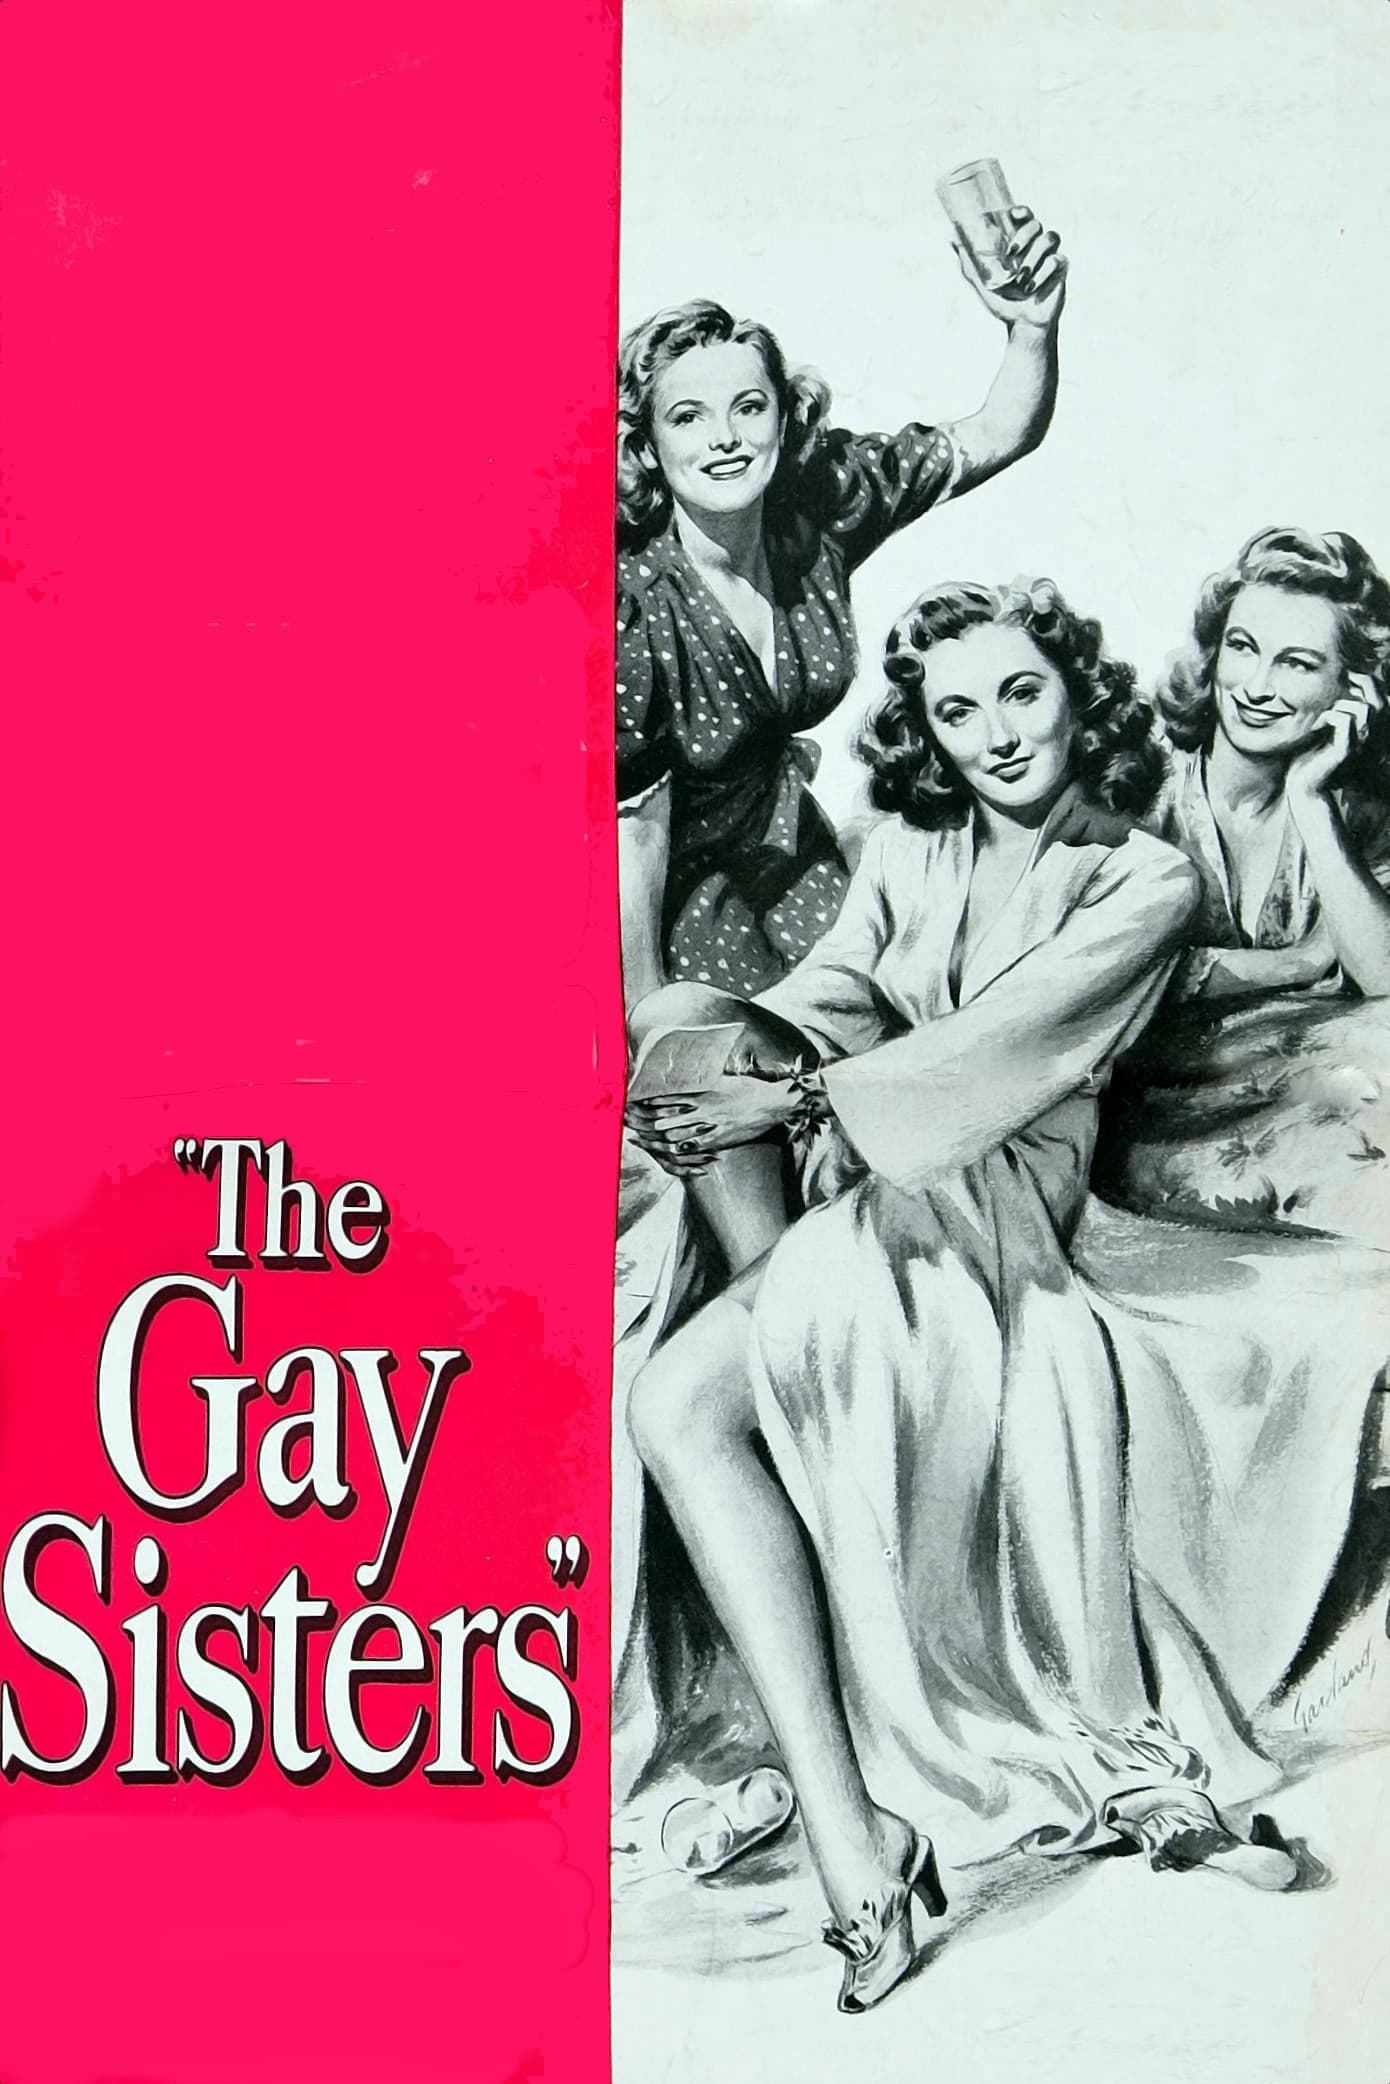 The Gay Sisters